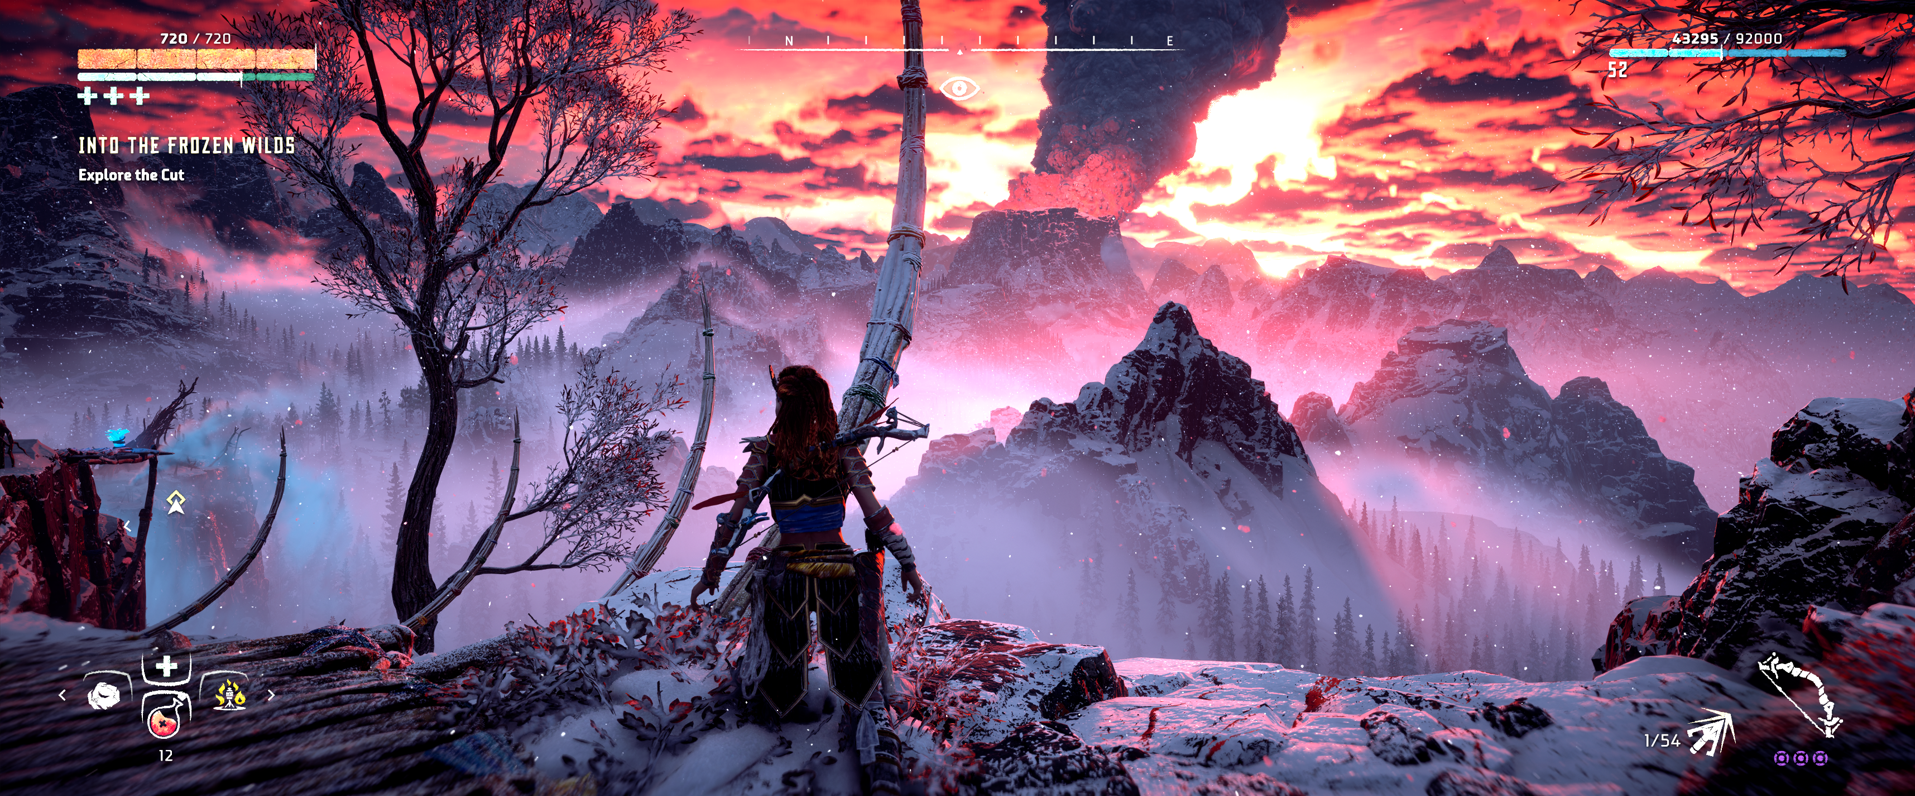 Horizon Zero Dawn Frozen Wilds DLC Aloy watching the volcano eruption with icy mountains in the background